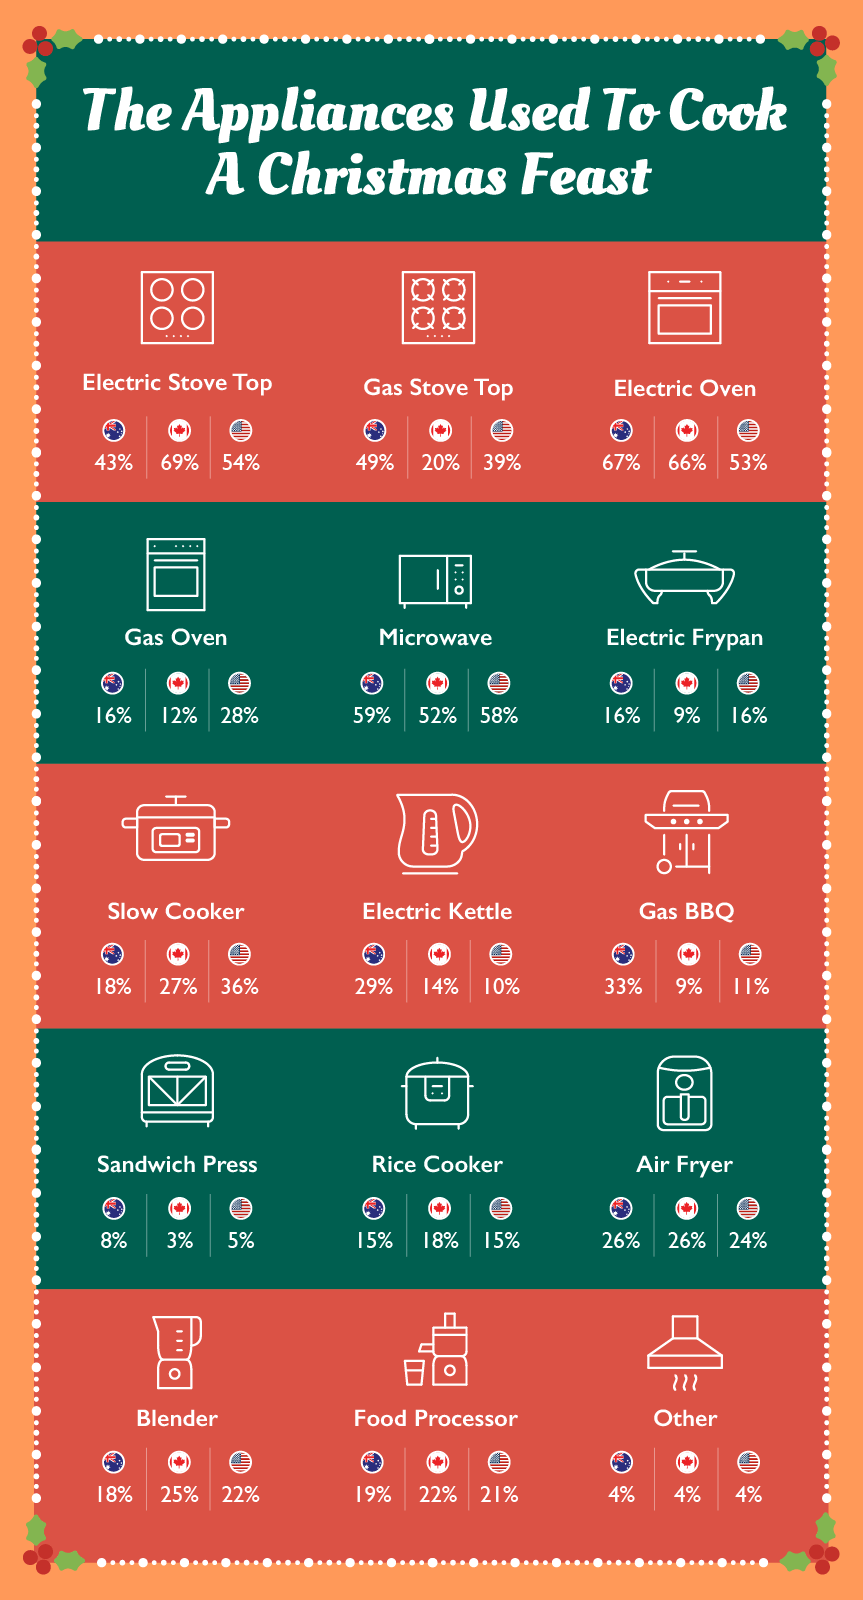 An infographic of appliances used to cook Christmas lunches and dinner based on a survey of Australians, Canadians and Americans.